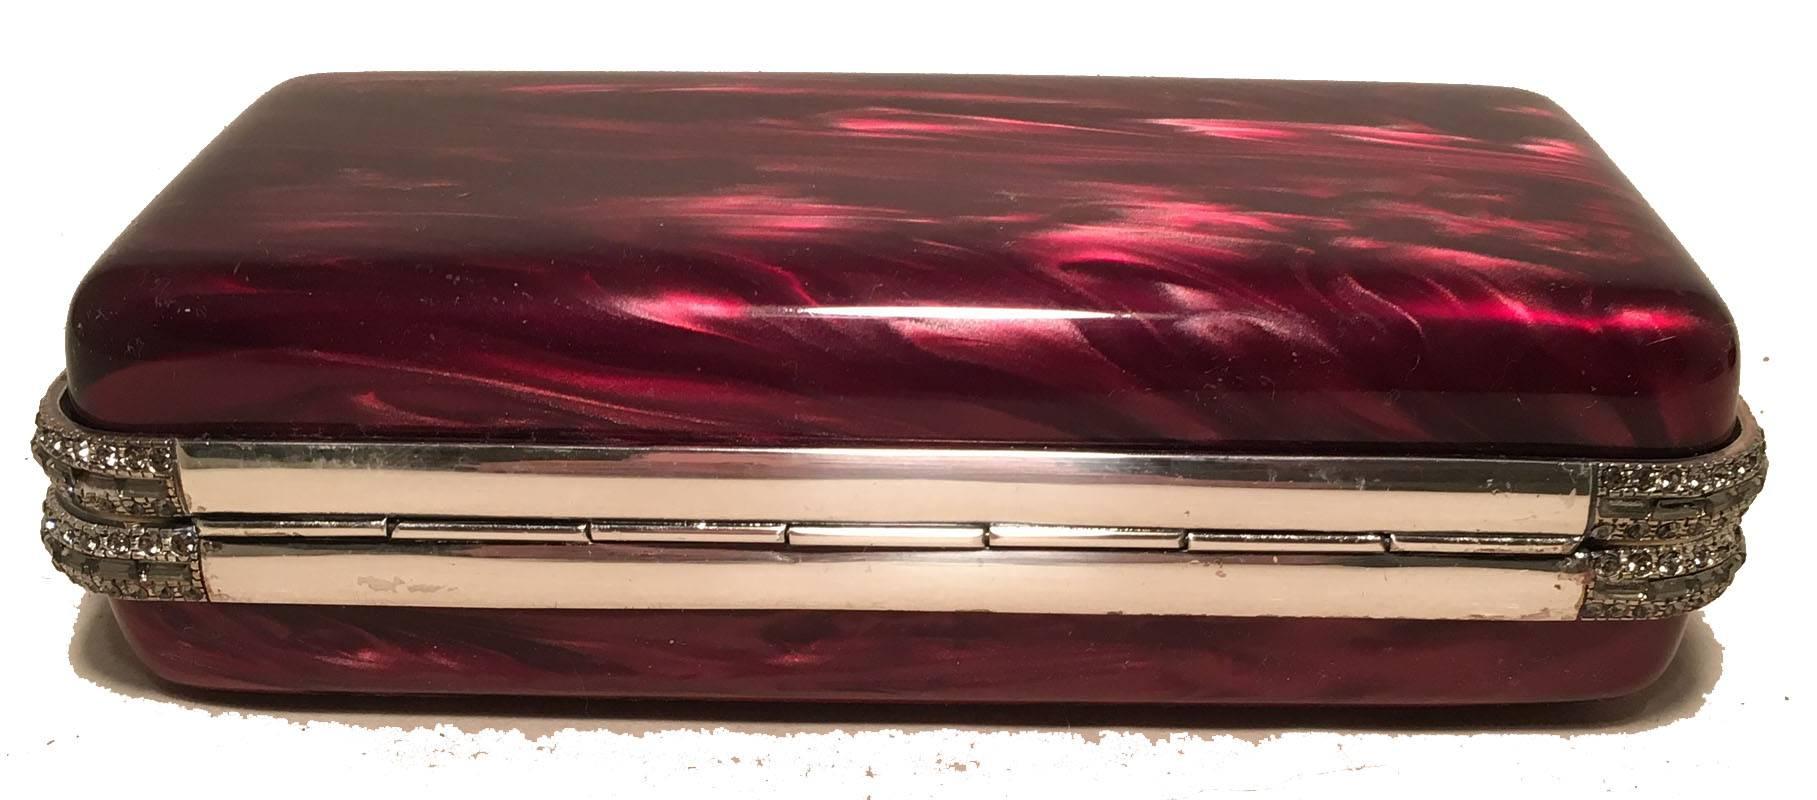 Black Judith Leiber Maroon Pearlized Box Clutch with Crystals